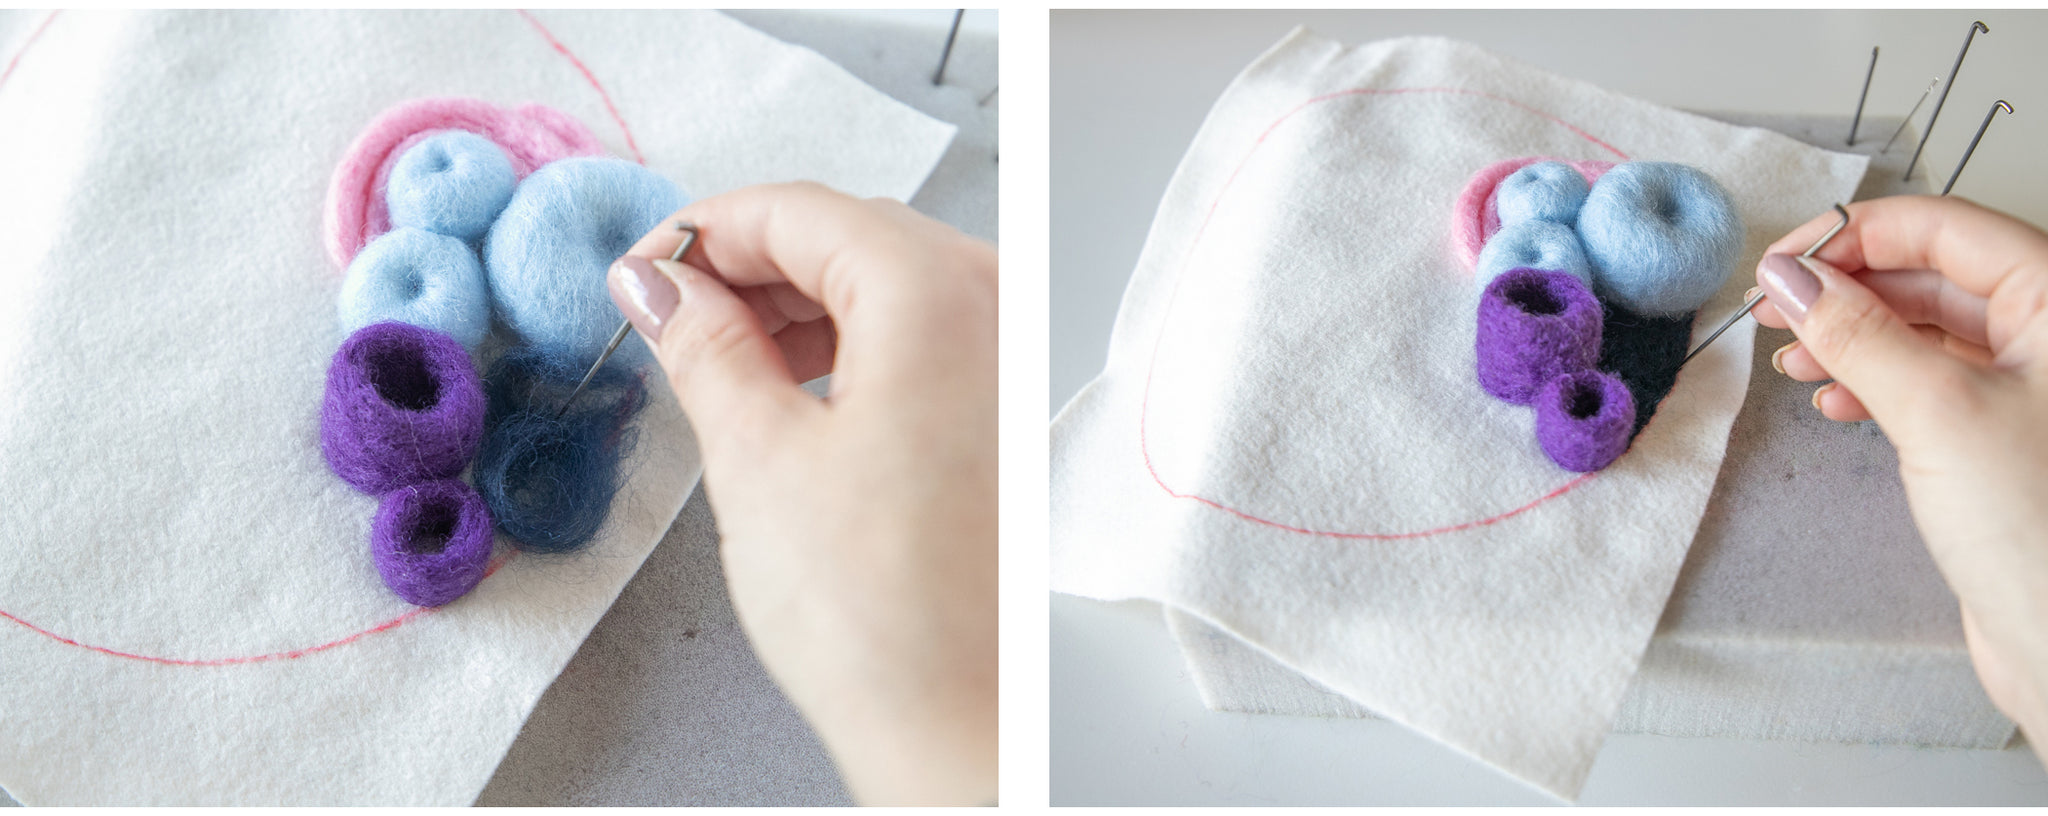 Creating dimension with flat felted surface